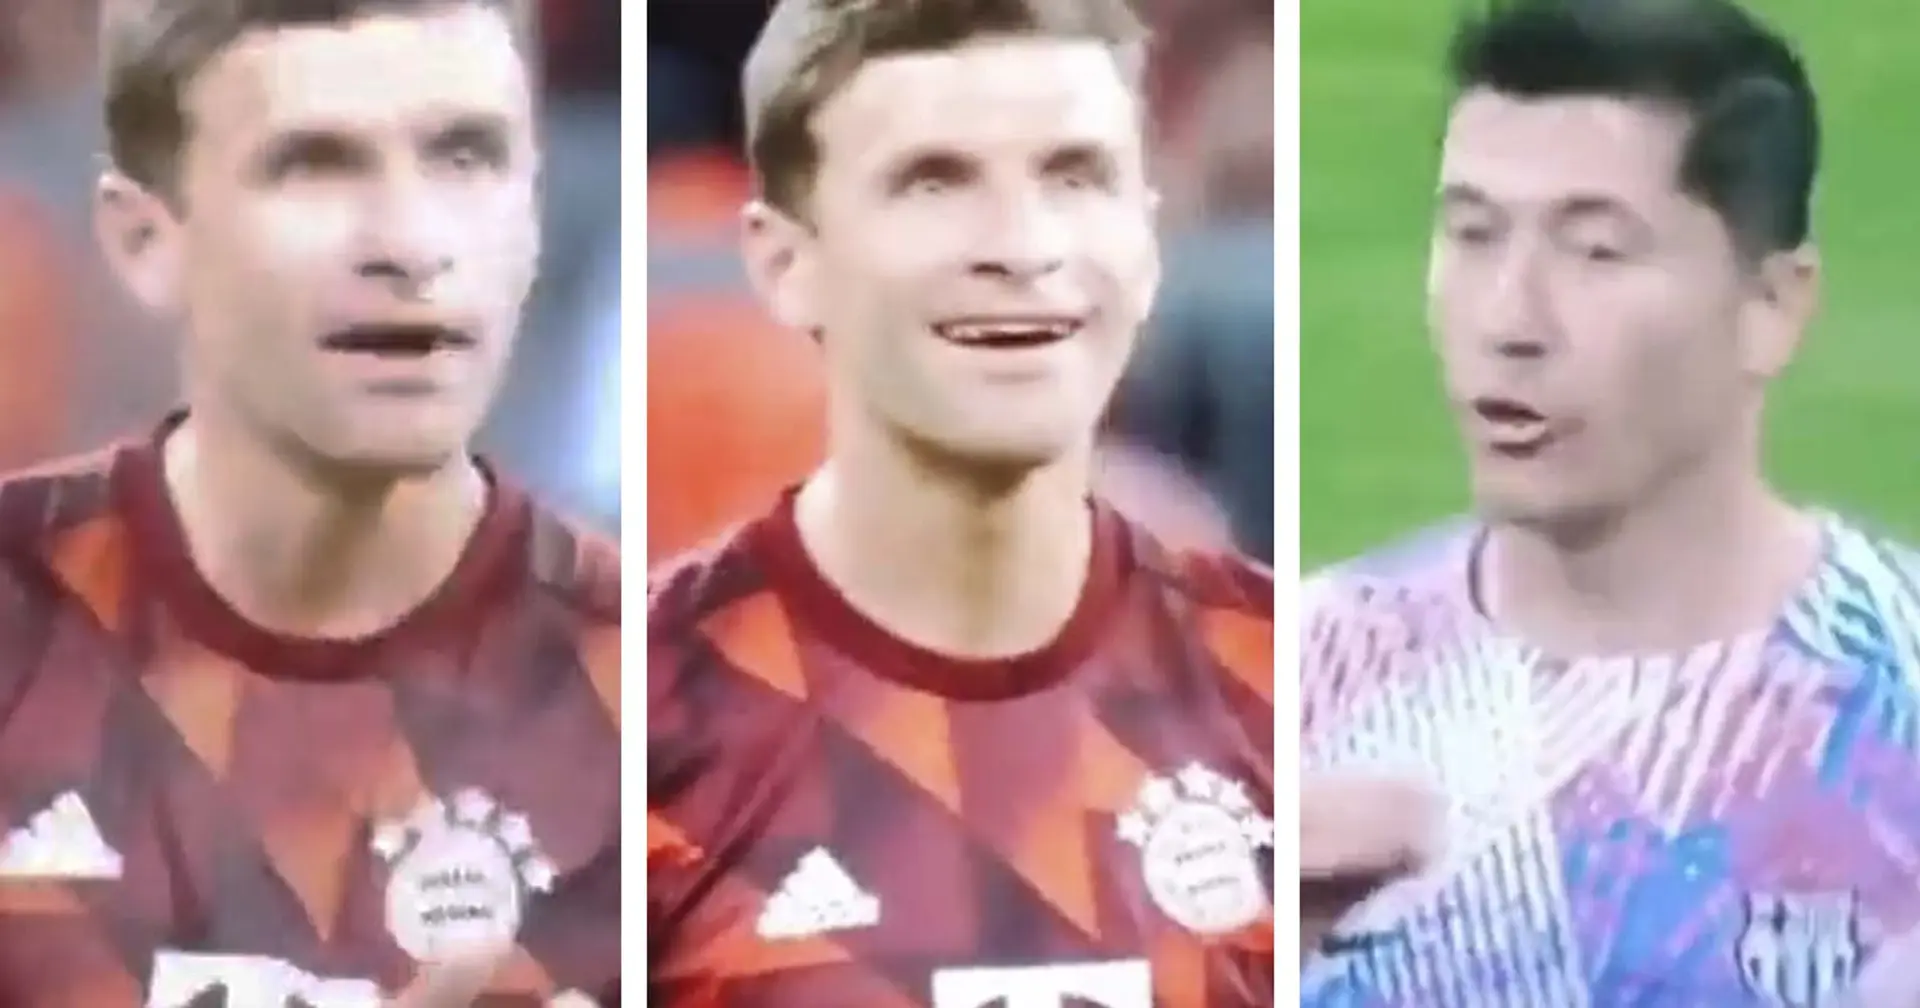 Muller showily points to Bayern crest in pre-match warmup, Lewandowski's reaction spotted